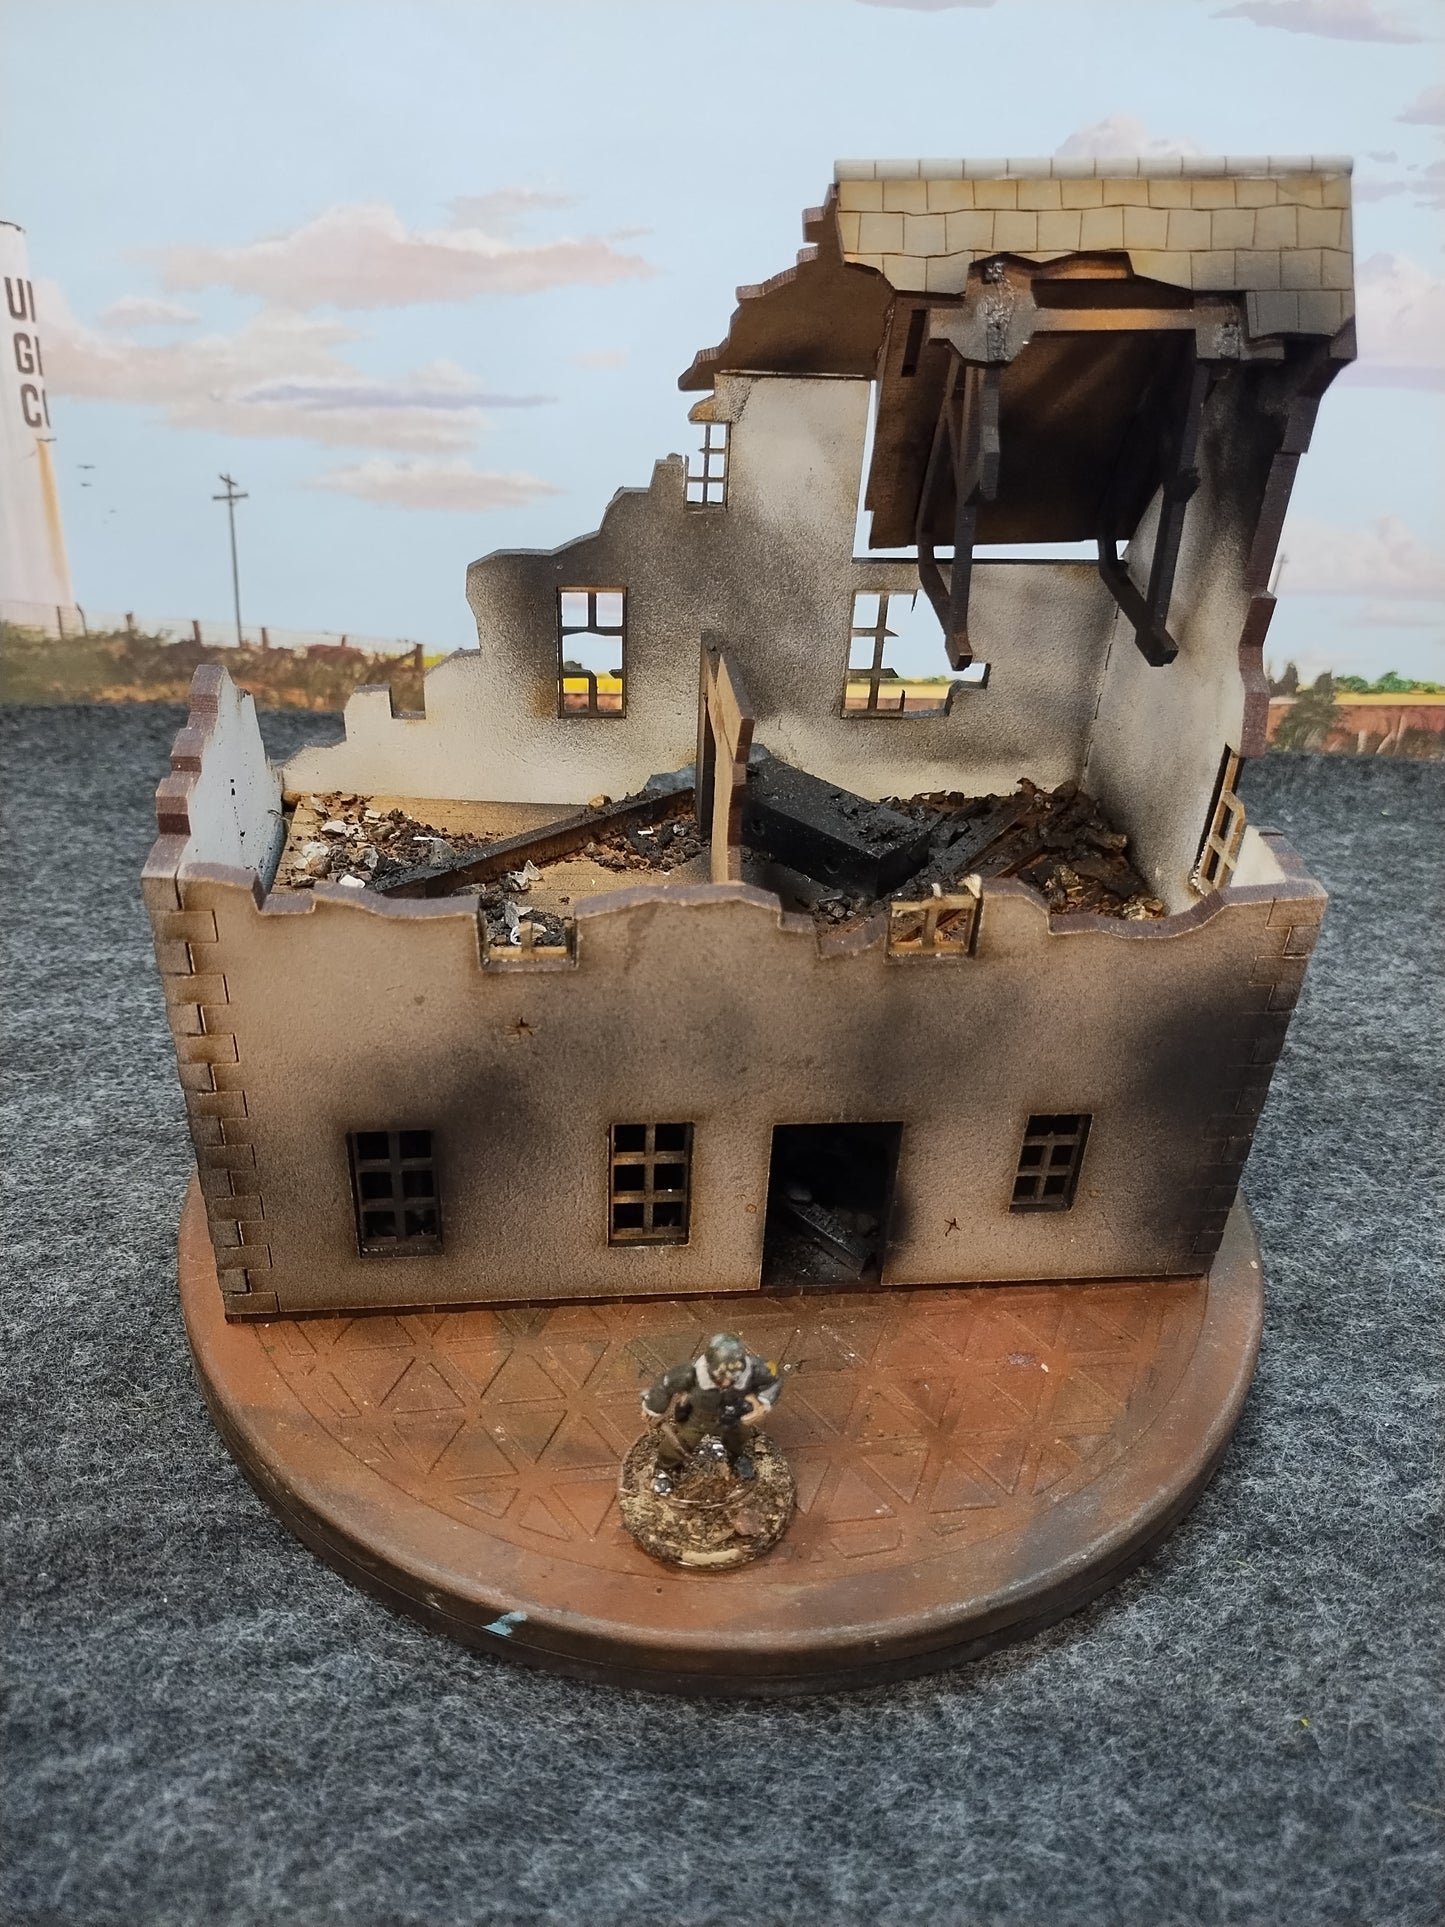 Normandy Sarissa House #5 - 28mm/Painted